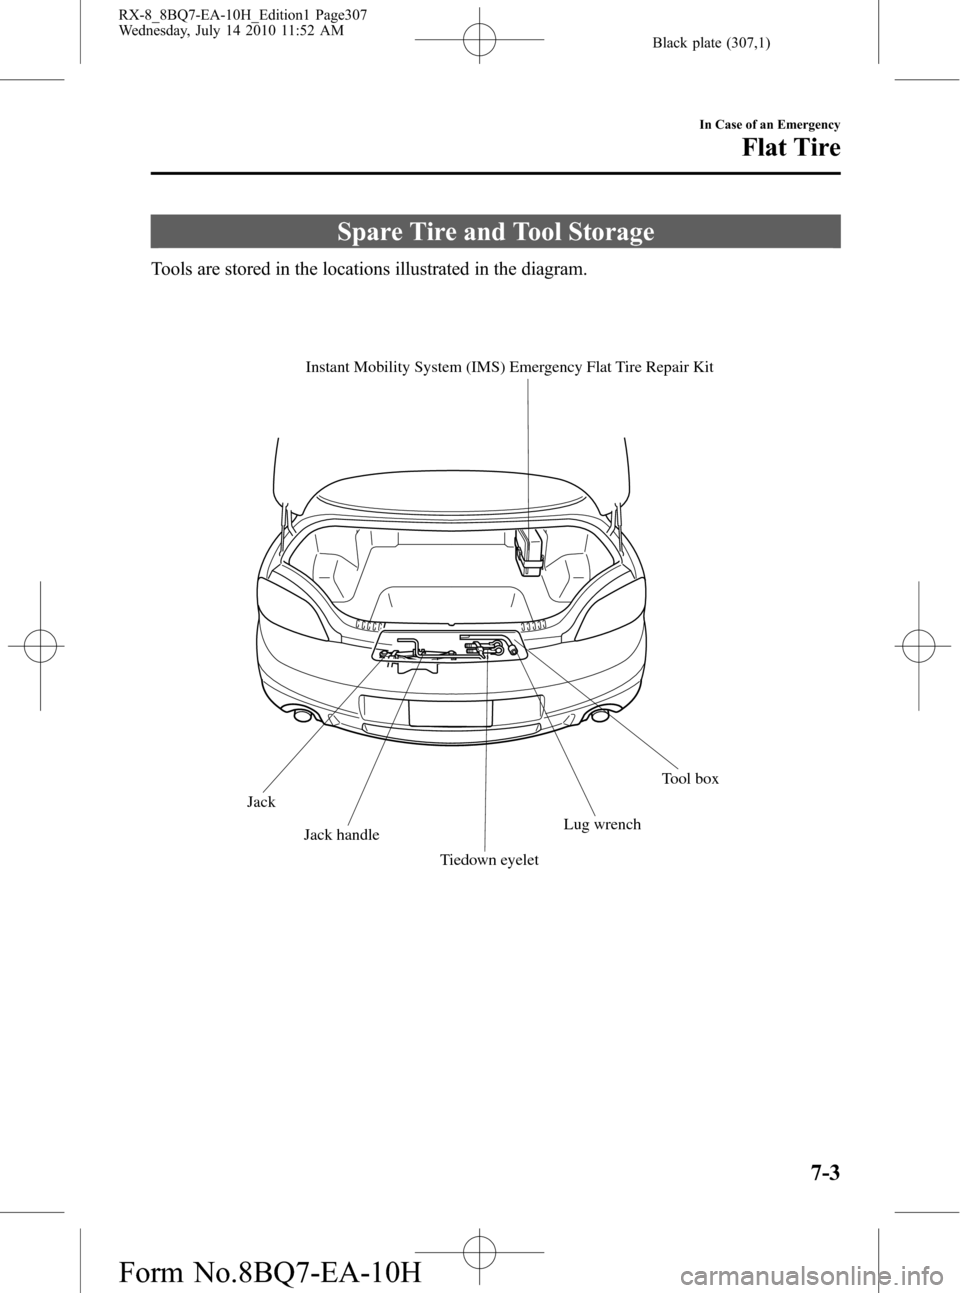 MAZDA MODEL RX 8 2011  Owners Manual (in English) Black plate (307,1)
Spare Tire and Tool Storage
Tools are stored in the locations illustrated in the diagram.
Tool box Instant Mobility System (IMS) Emergency Flat Tire Repair Kit
Jack
Jack handle
Tie